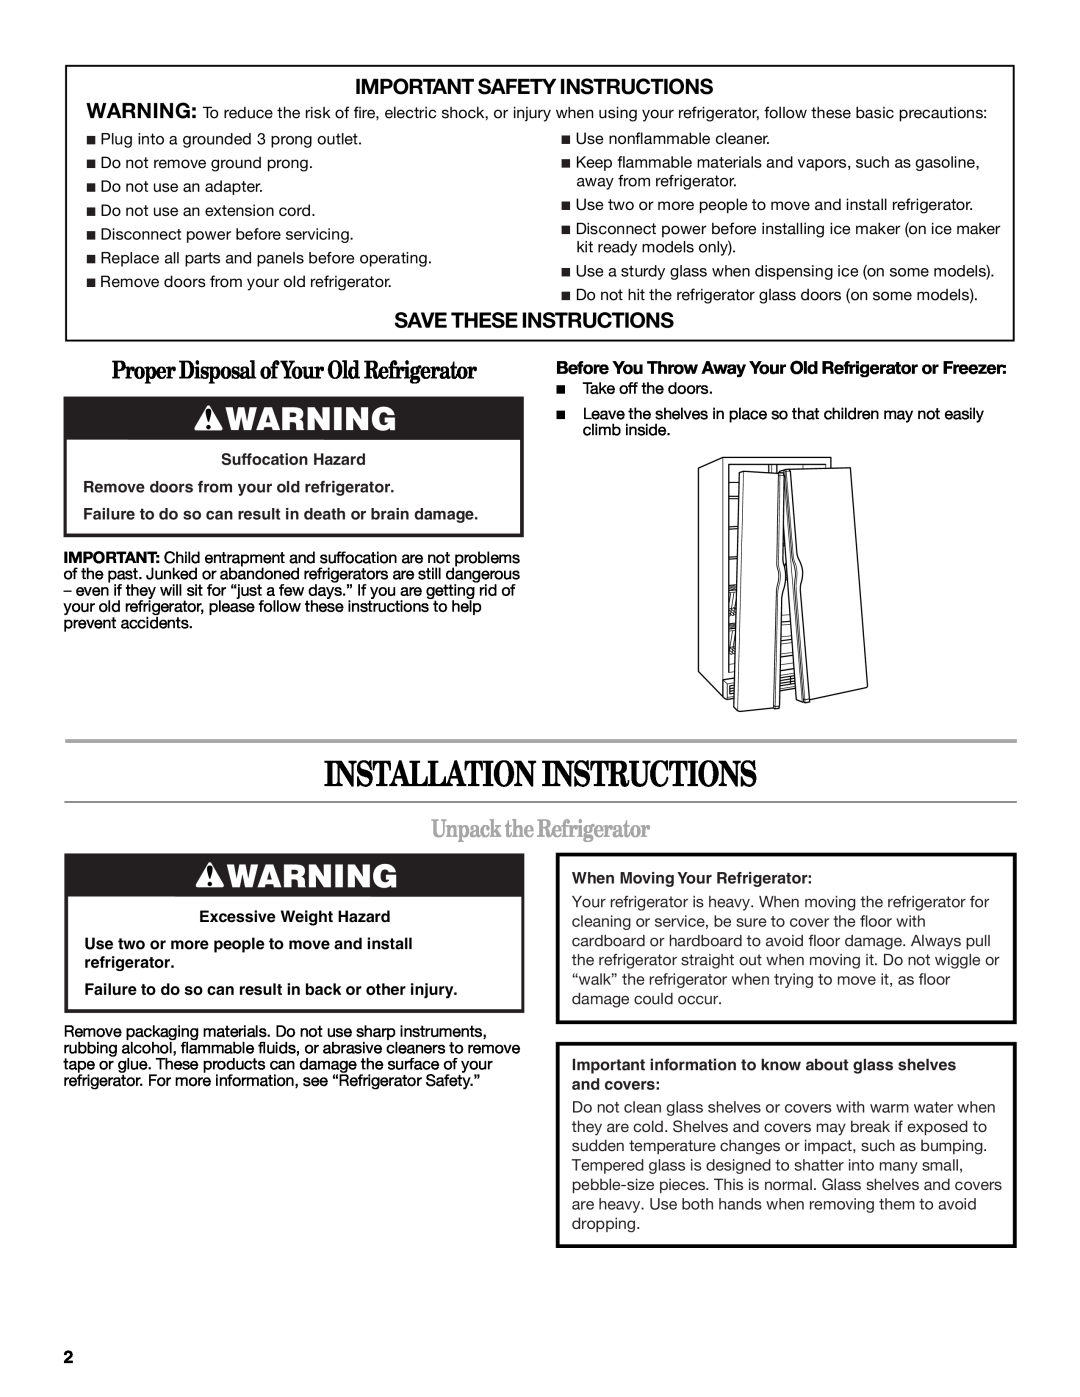 Whirlpool ED2VHEXVQ01, ED5GVEXVD02 Installation Instructions, Unpack the Refrigerator, Important Safety Instructions 